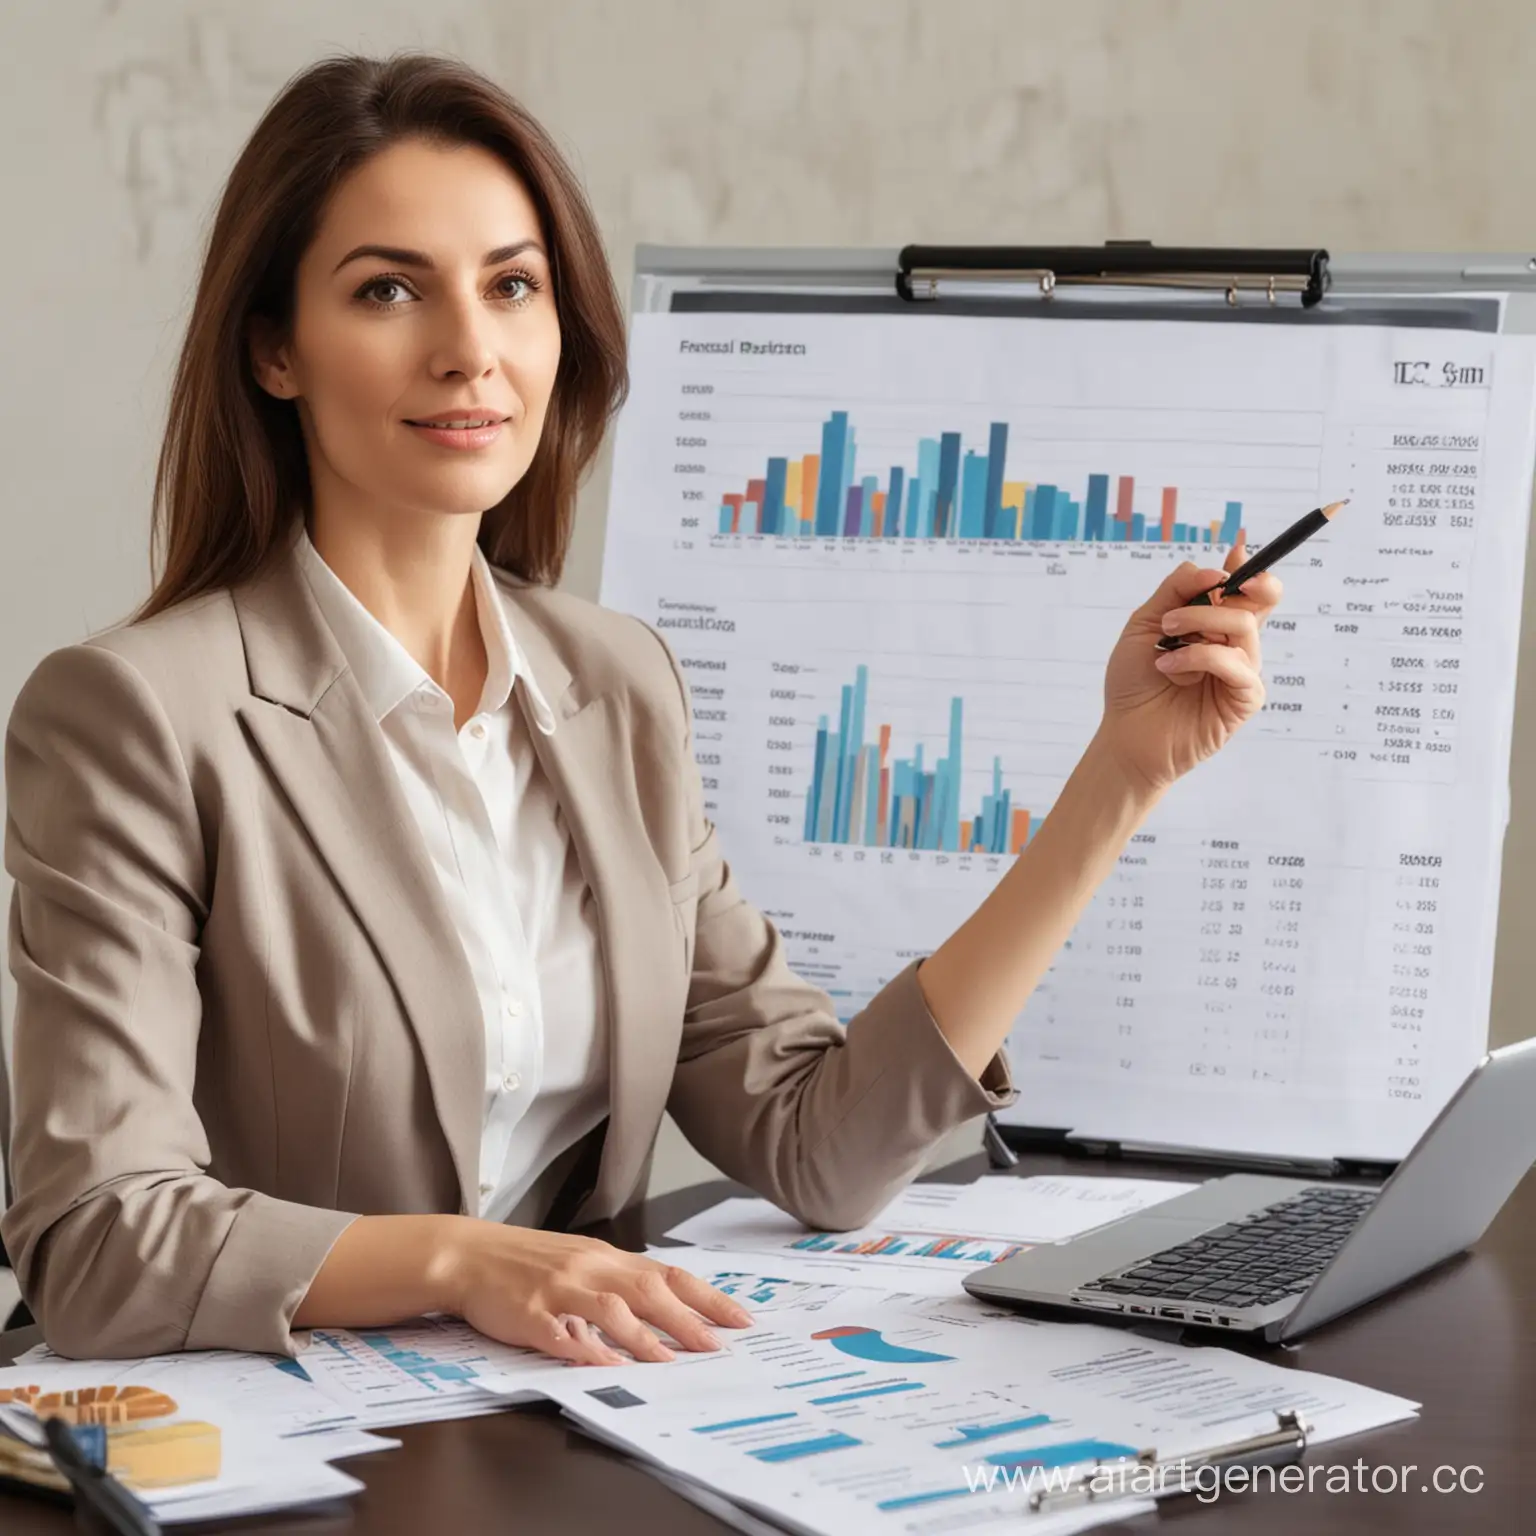 Woman-Financial-Expert-Conducts-Reporting-Presentation